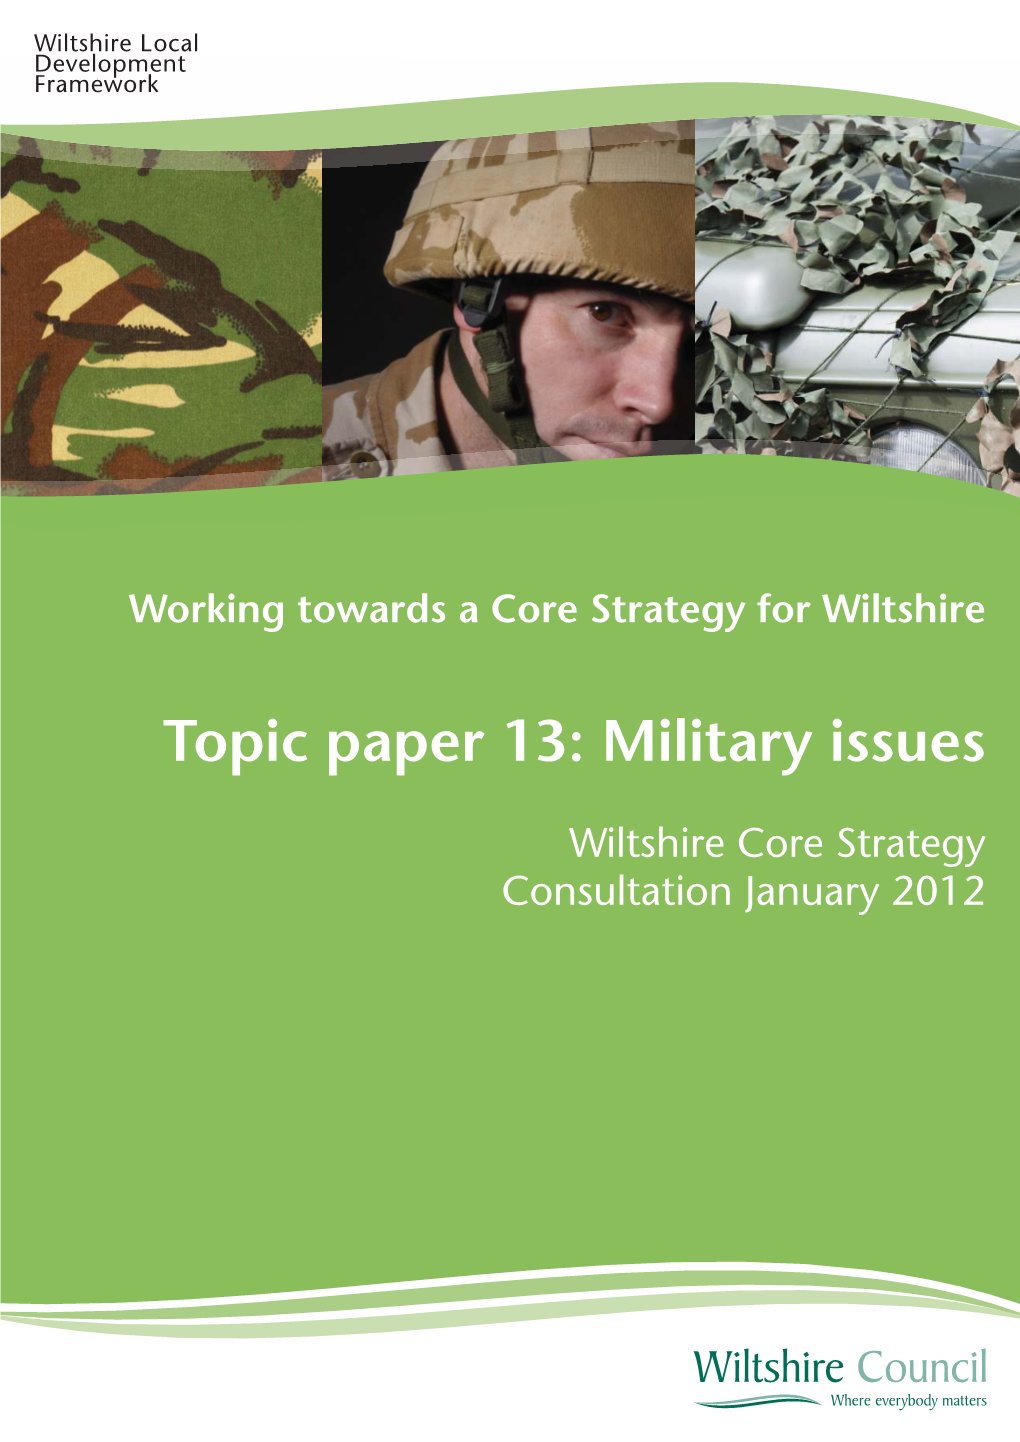 Topic Paper 13: Military Issues